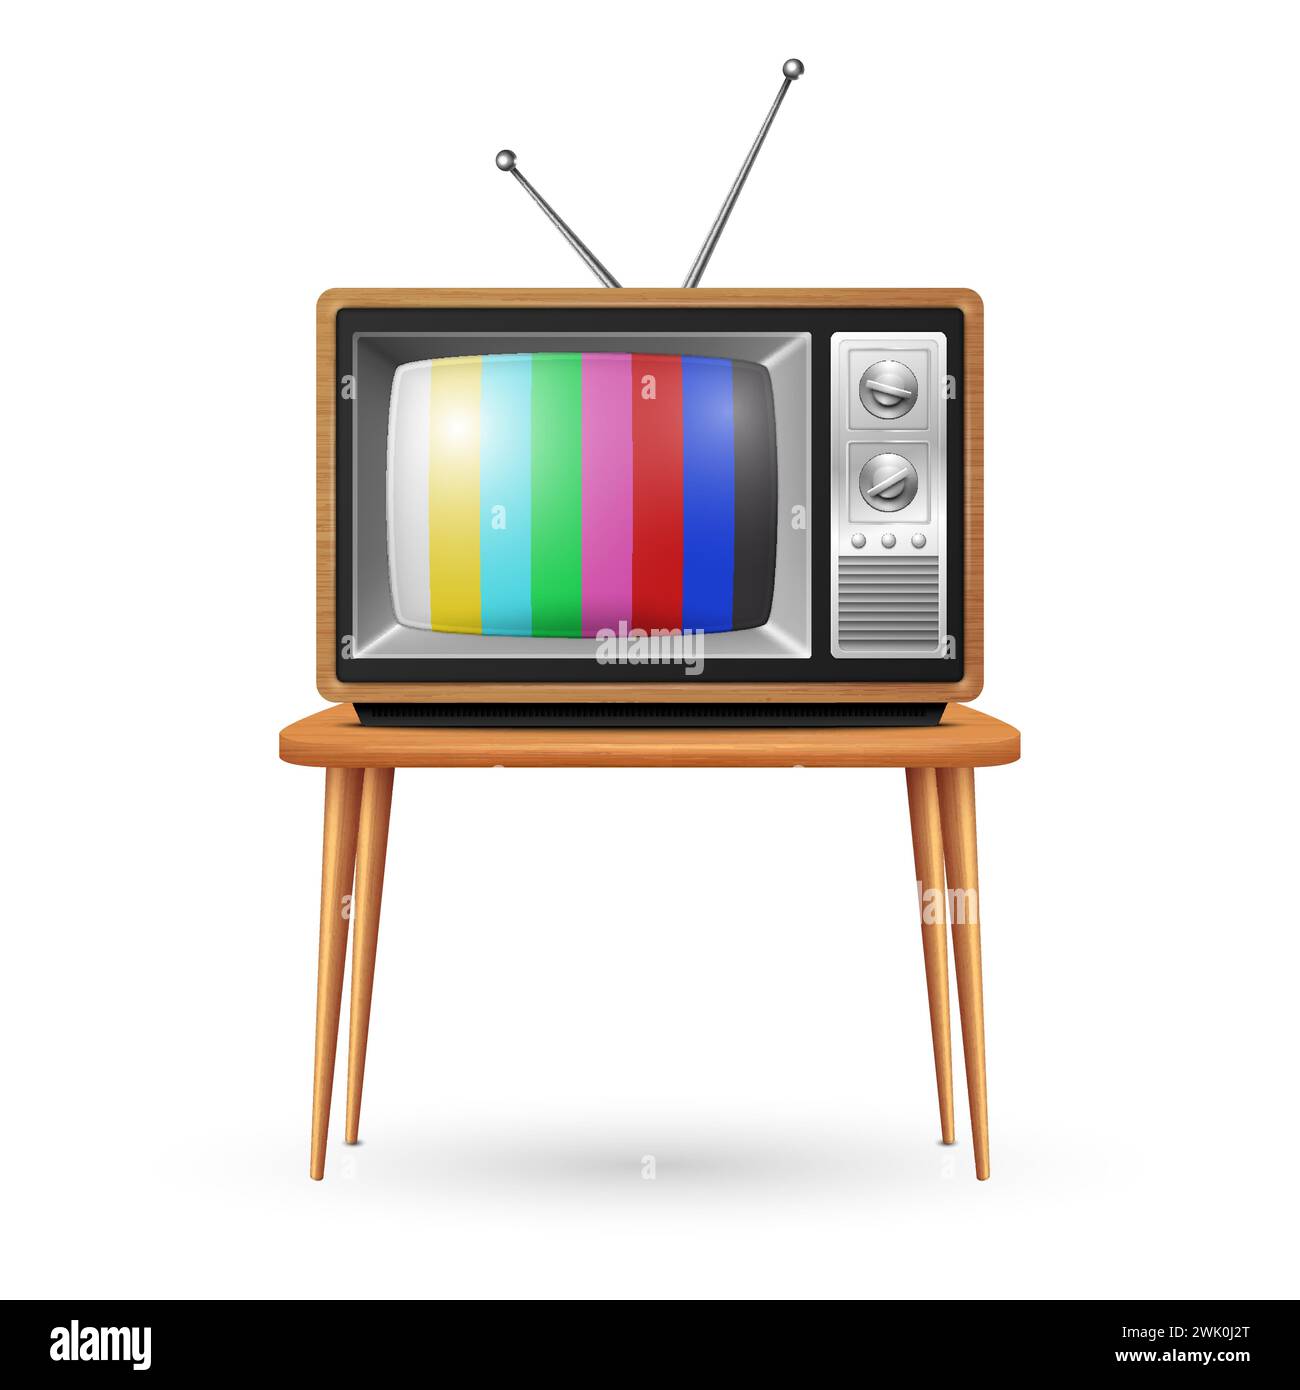 Vector 3d Realistic Retro TV Set Isolated. Home Interior Design Concept with Vintage Television Set in Front View. Classic Retro TV Receiver Stock Vector